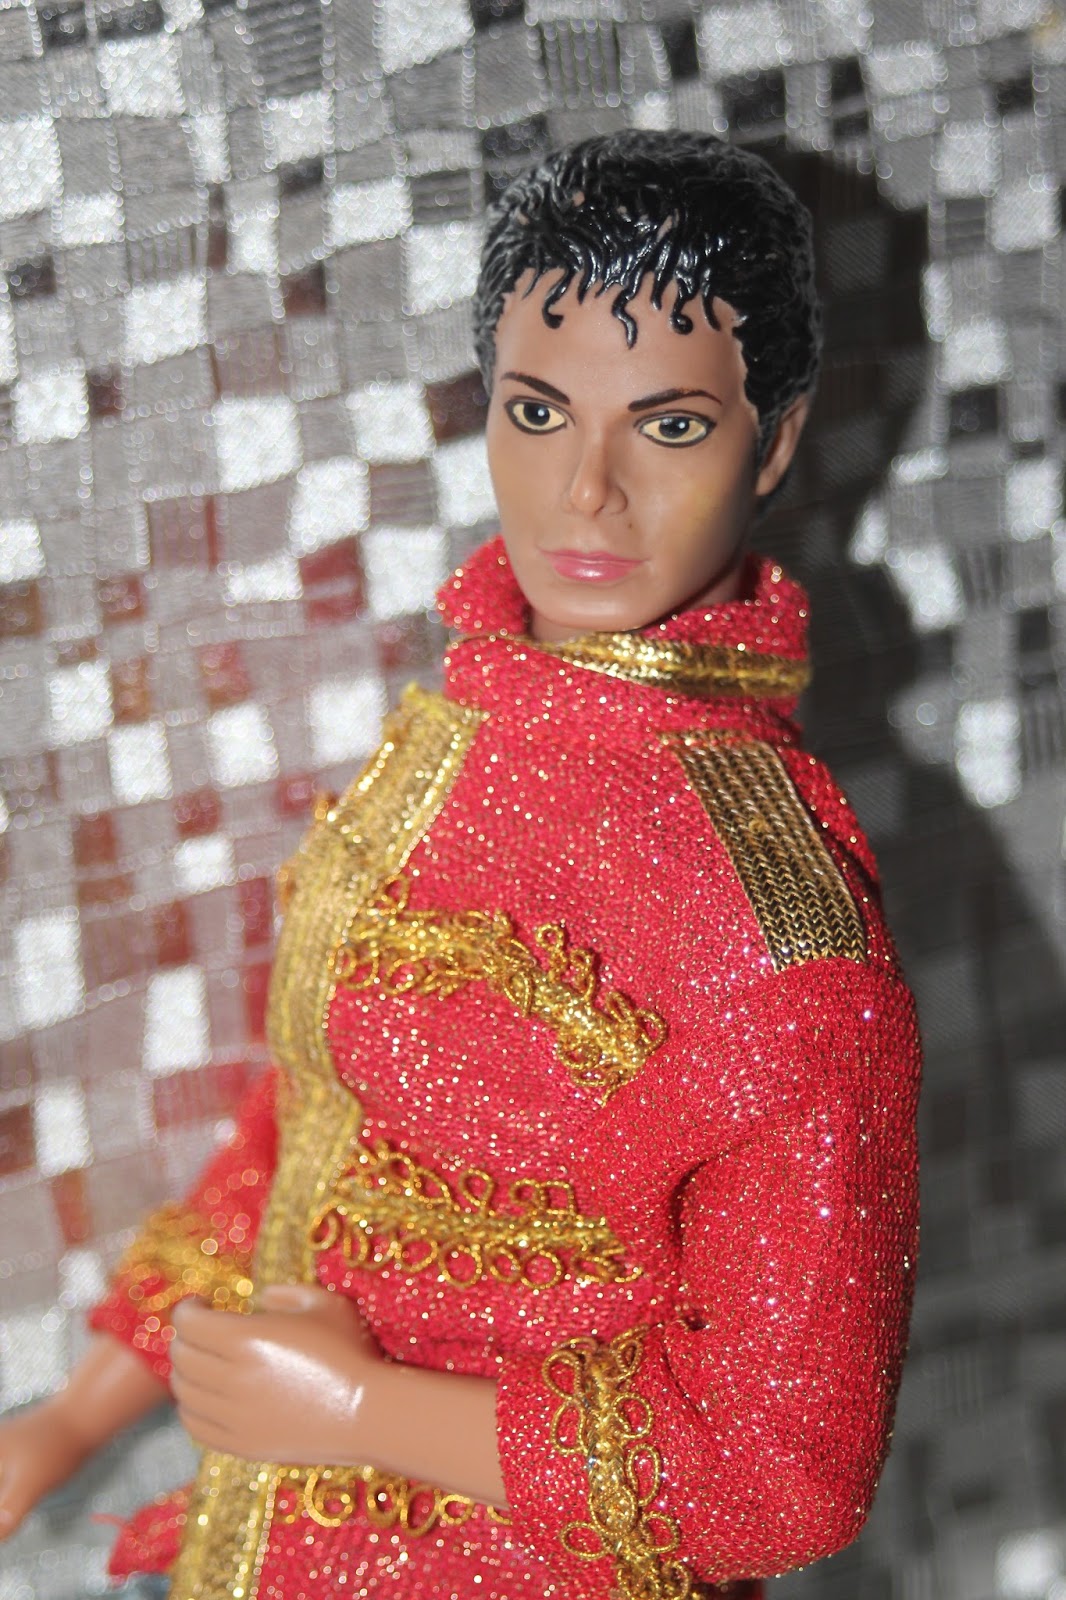 PLANET OF THE DOLLS: Doll-A-Day 2017 #332: Michael Jackson